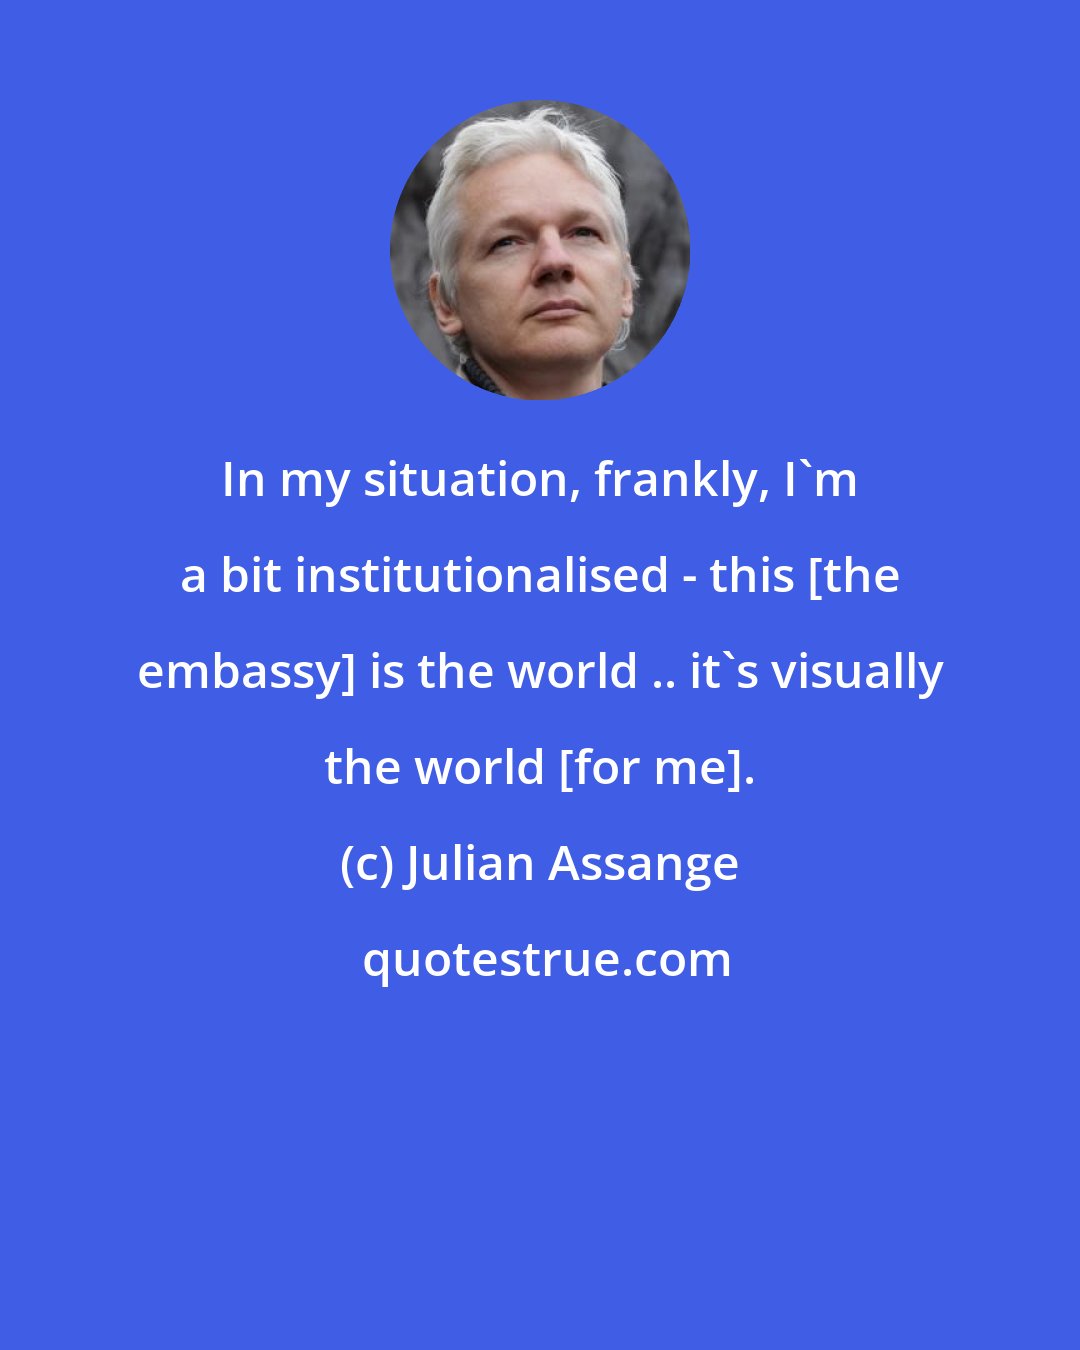 Julian Assange: In my situation, frankly, I'm a bit institutionalised - this [the embassy] is the world .. it's visually the world [for me].